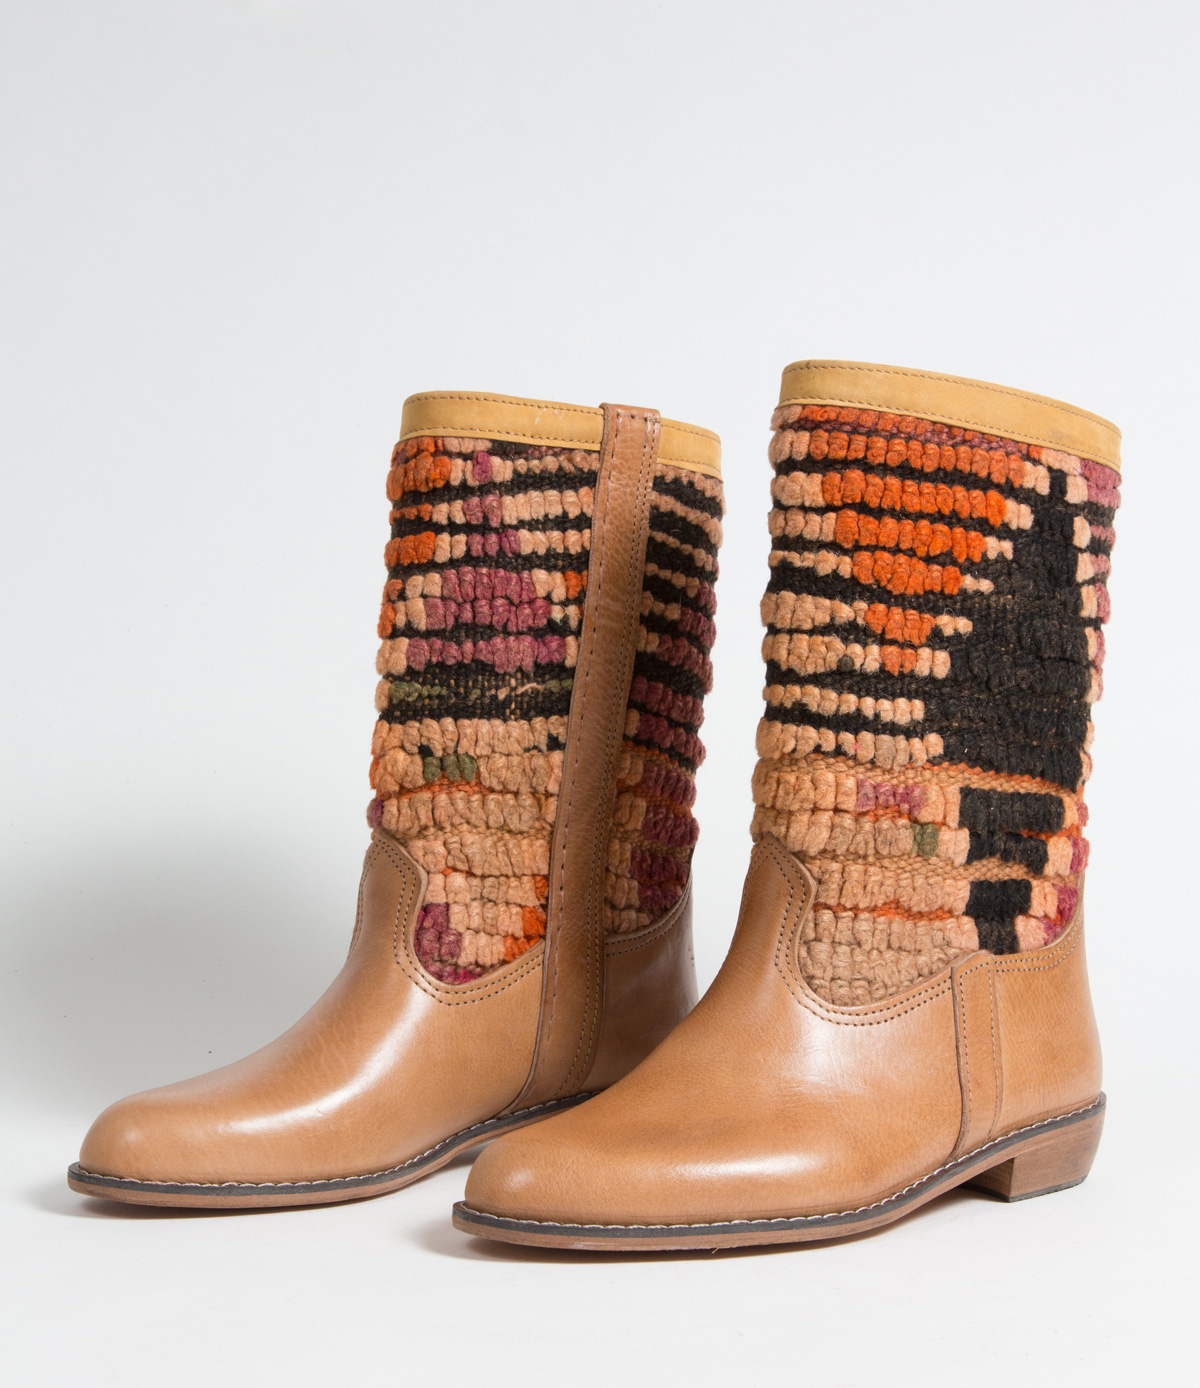 Bottes Kilim cuir mababouche artisanales (Réf. GL5-41)